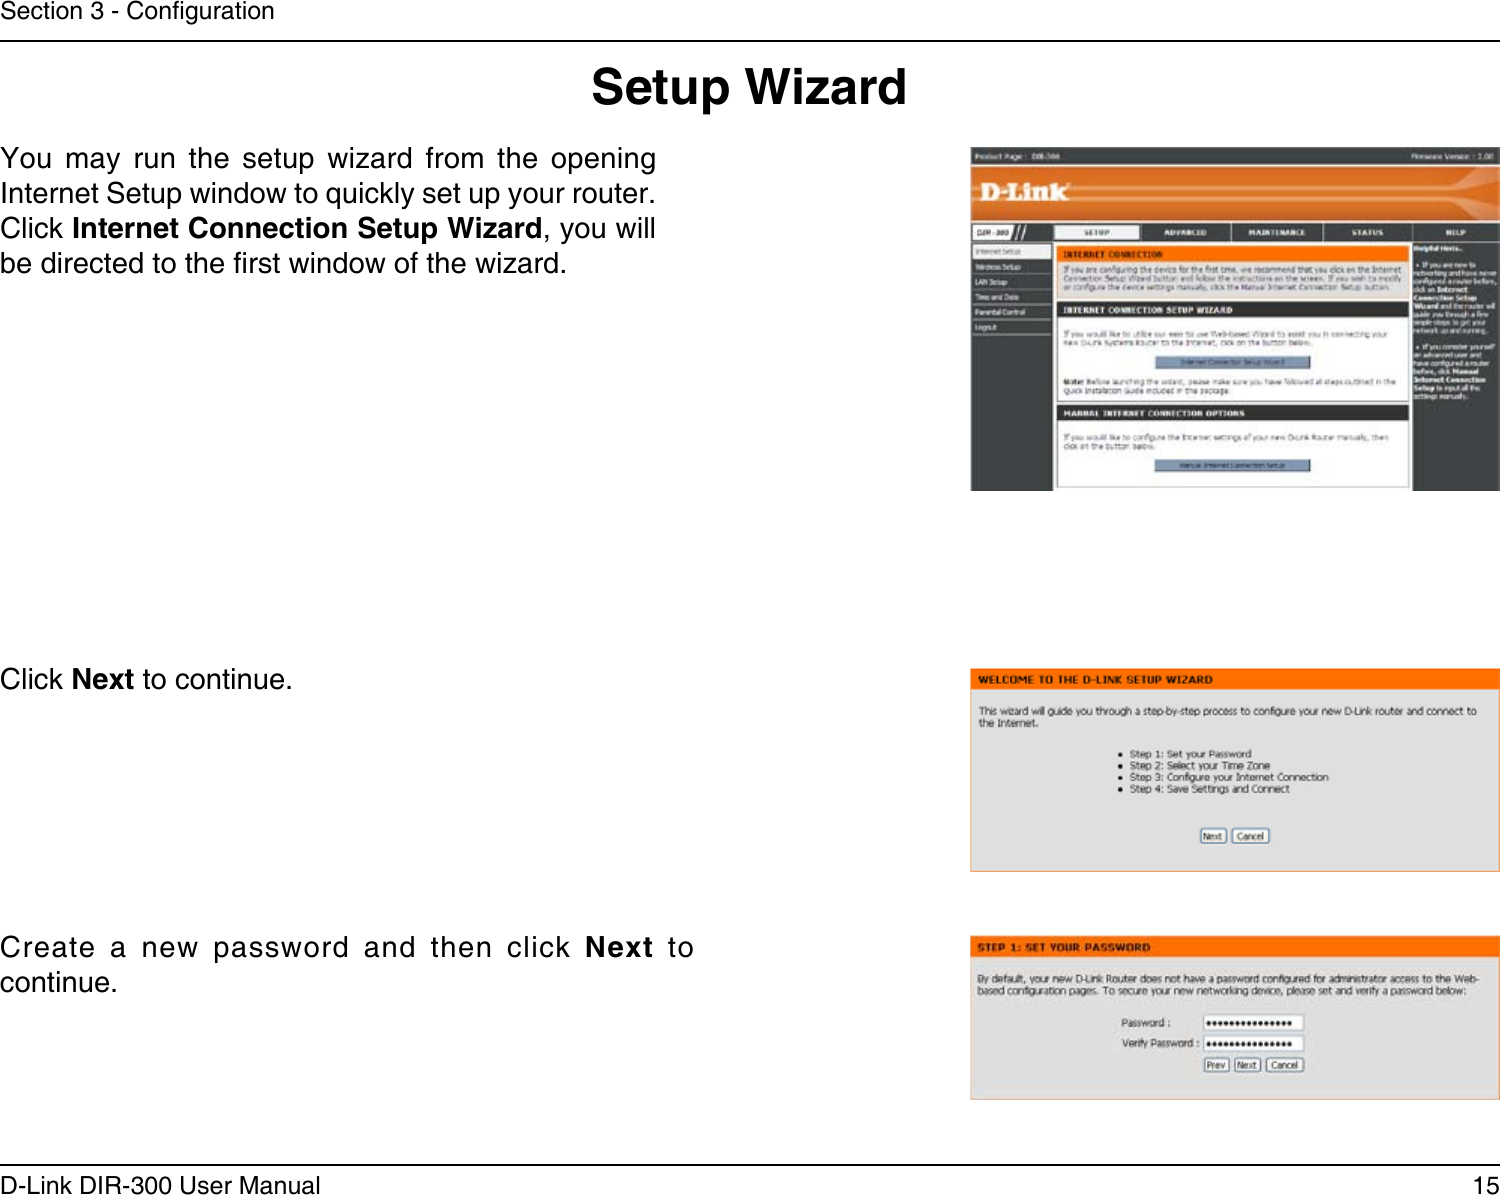 15D-Link DIR-300 User ManualSection 3 - CongurationSetup WizardYou  may  run  the  setup  wizard  from  the  opening Internet Setup window to quickly set up your router. Click Internet Connection Setup Wizard, you will be directed to the rst window of the wizard.Click Next to continue.Create  a  new  password  and  then  click  Next  to continue.